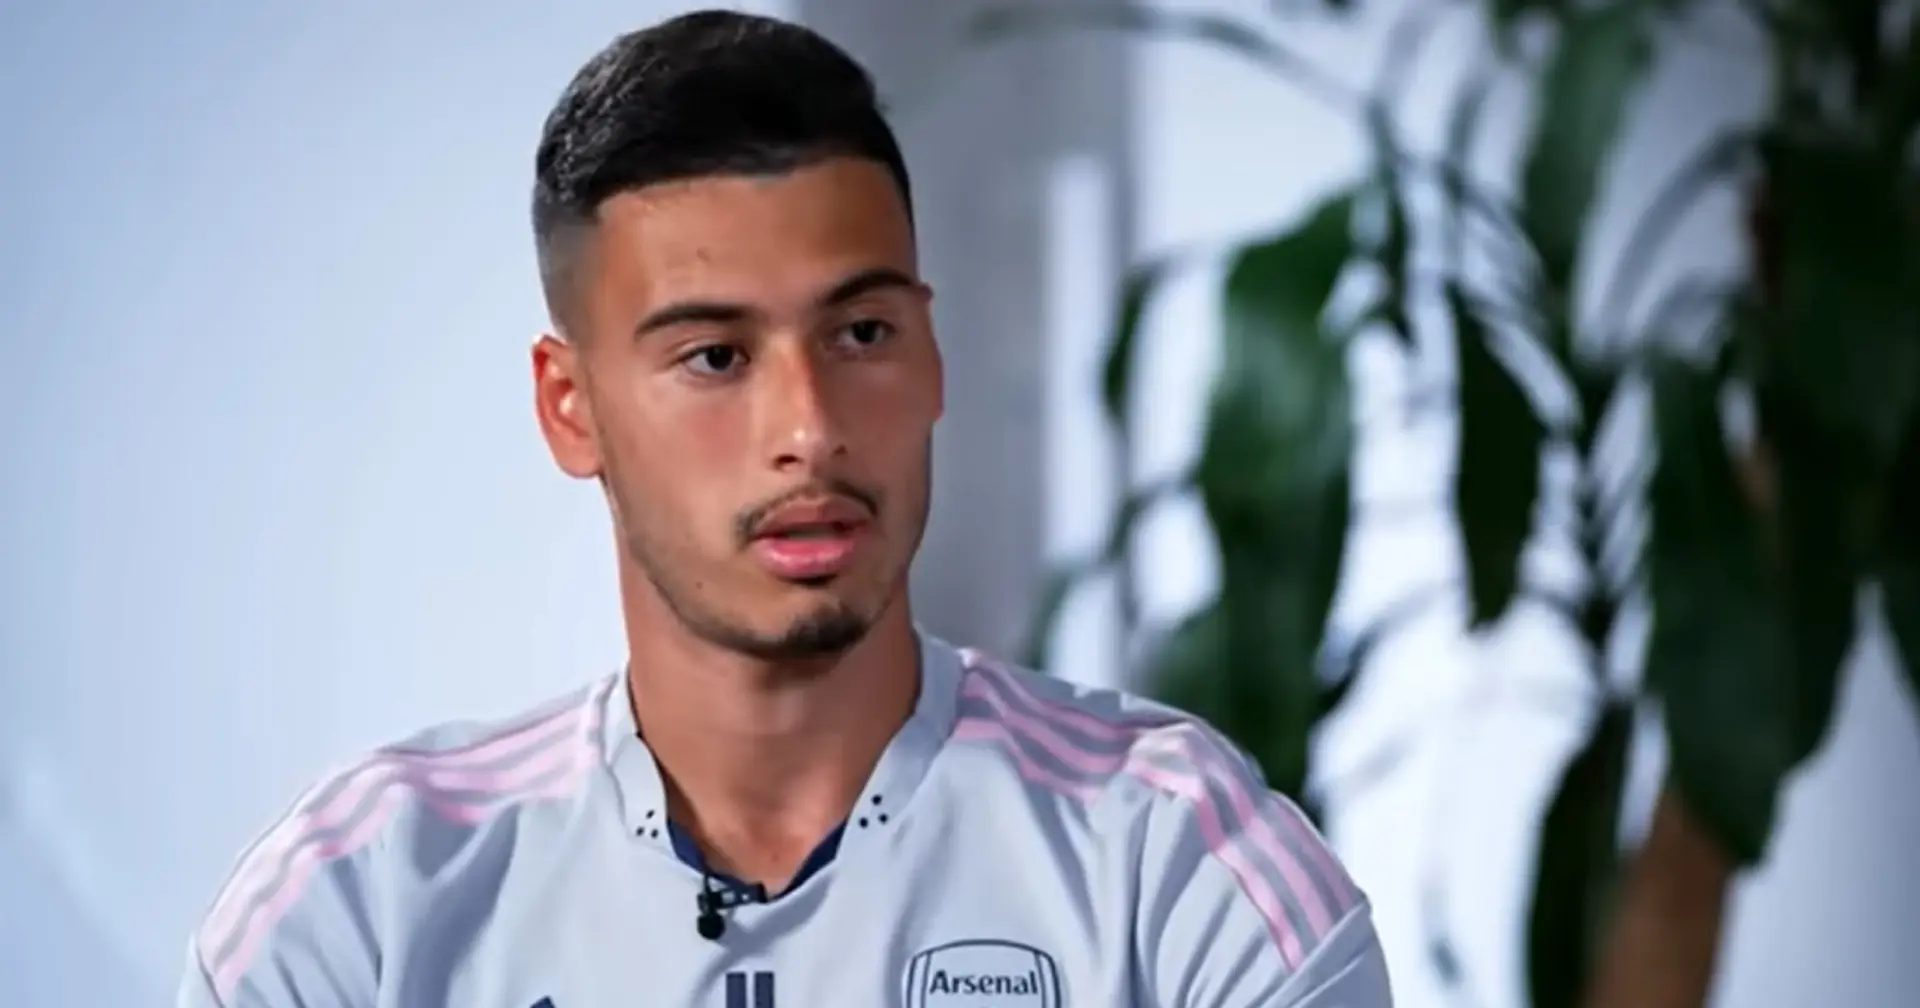 'I'm pretty cool about it': Gabriel Martinelli responds to vicious objections over his Brazil inclusion